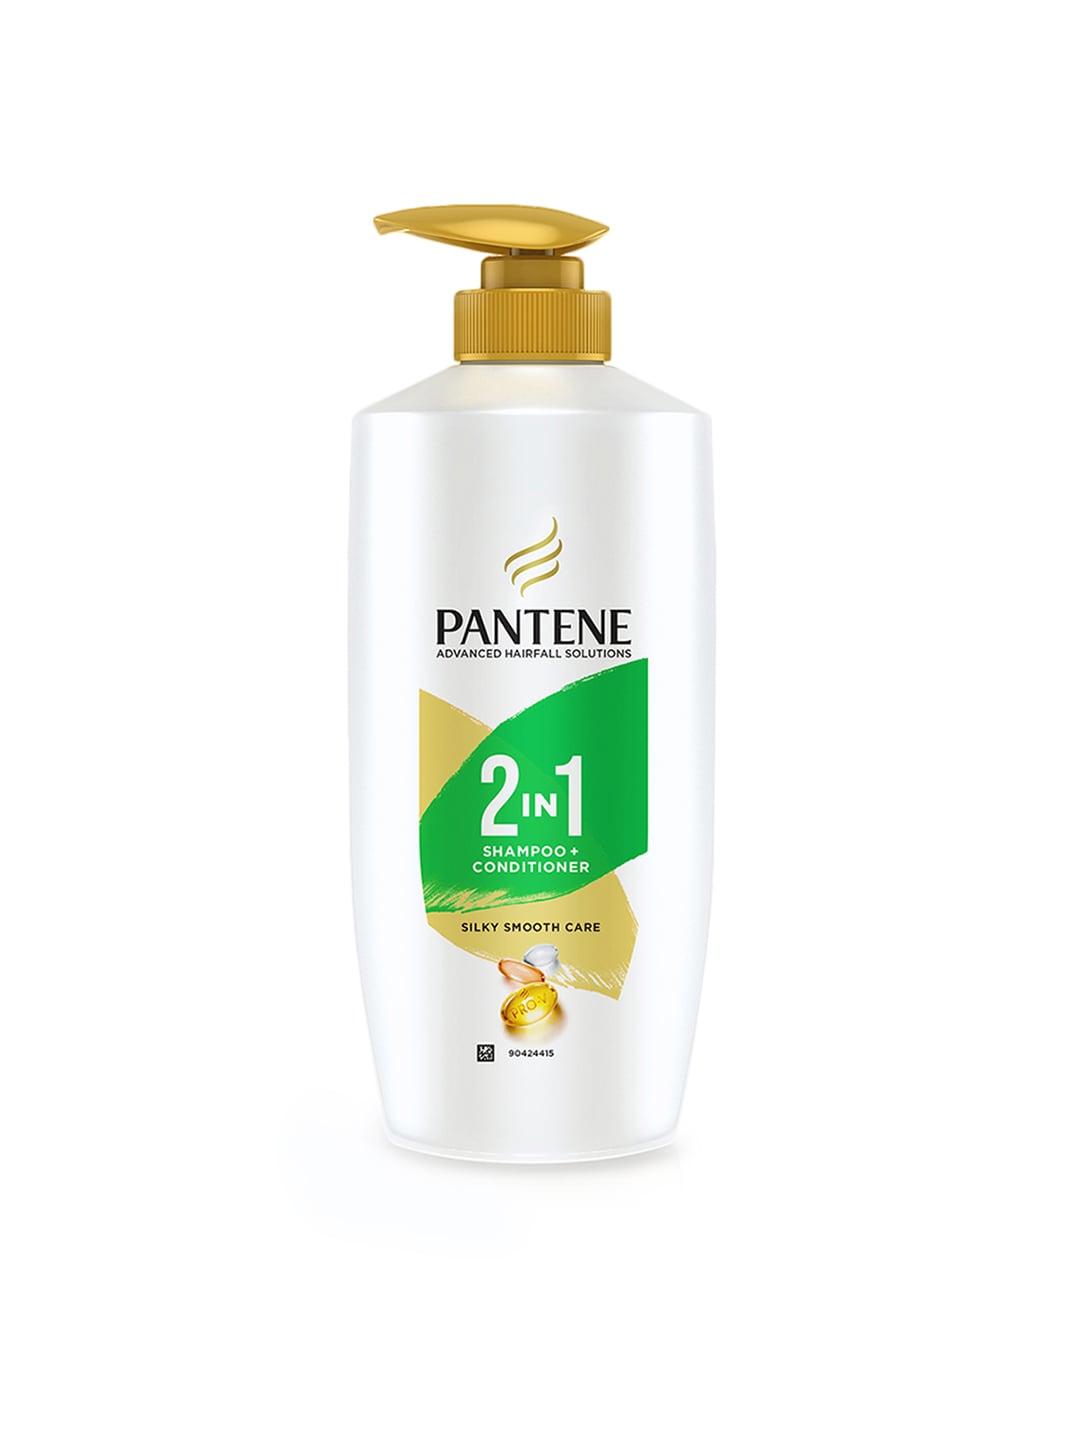 pantene advanced hairfall solution 2-in-1 silky smooth care shampoo + conditioner - 1 l